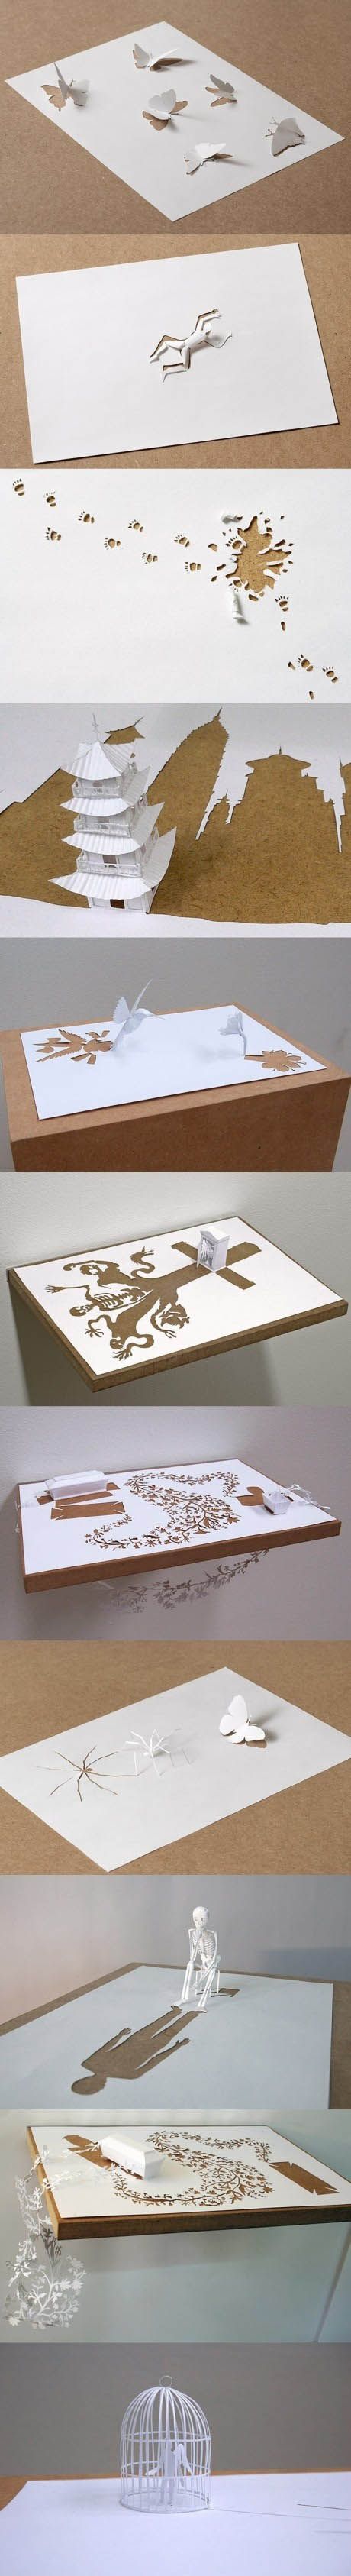 Awesome Paper Art